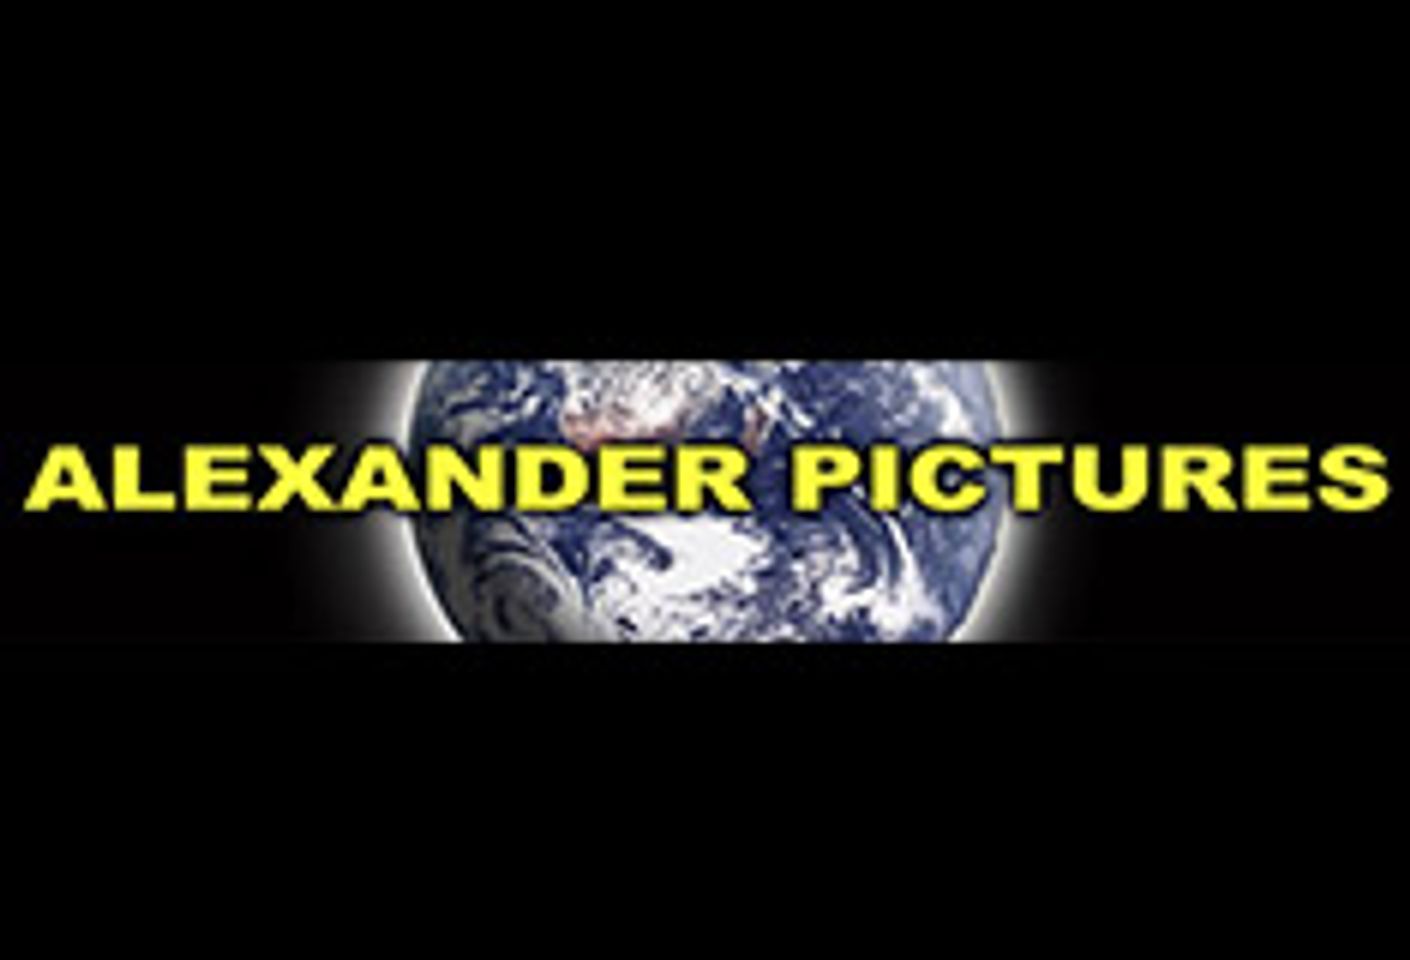 NakedSword-AEBN Signs Alexander Pictures